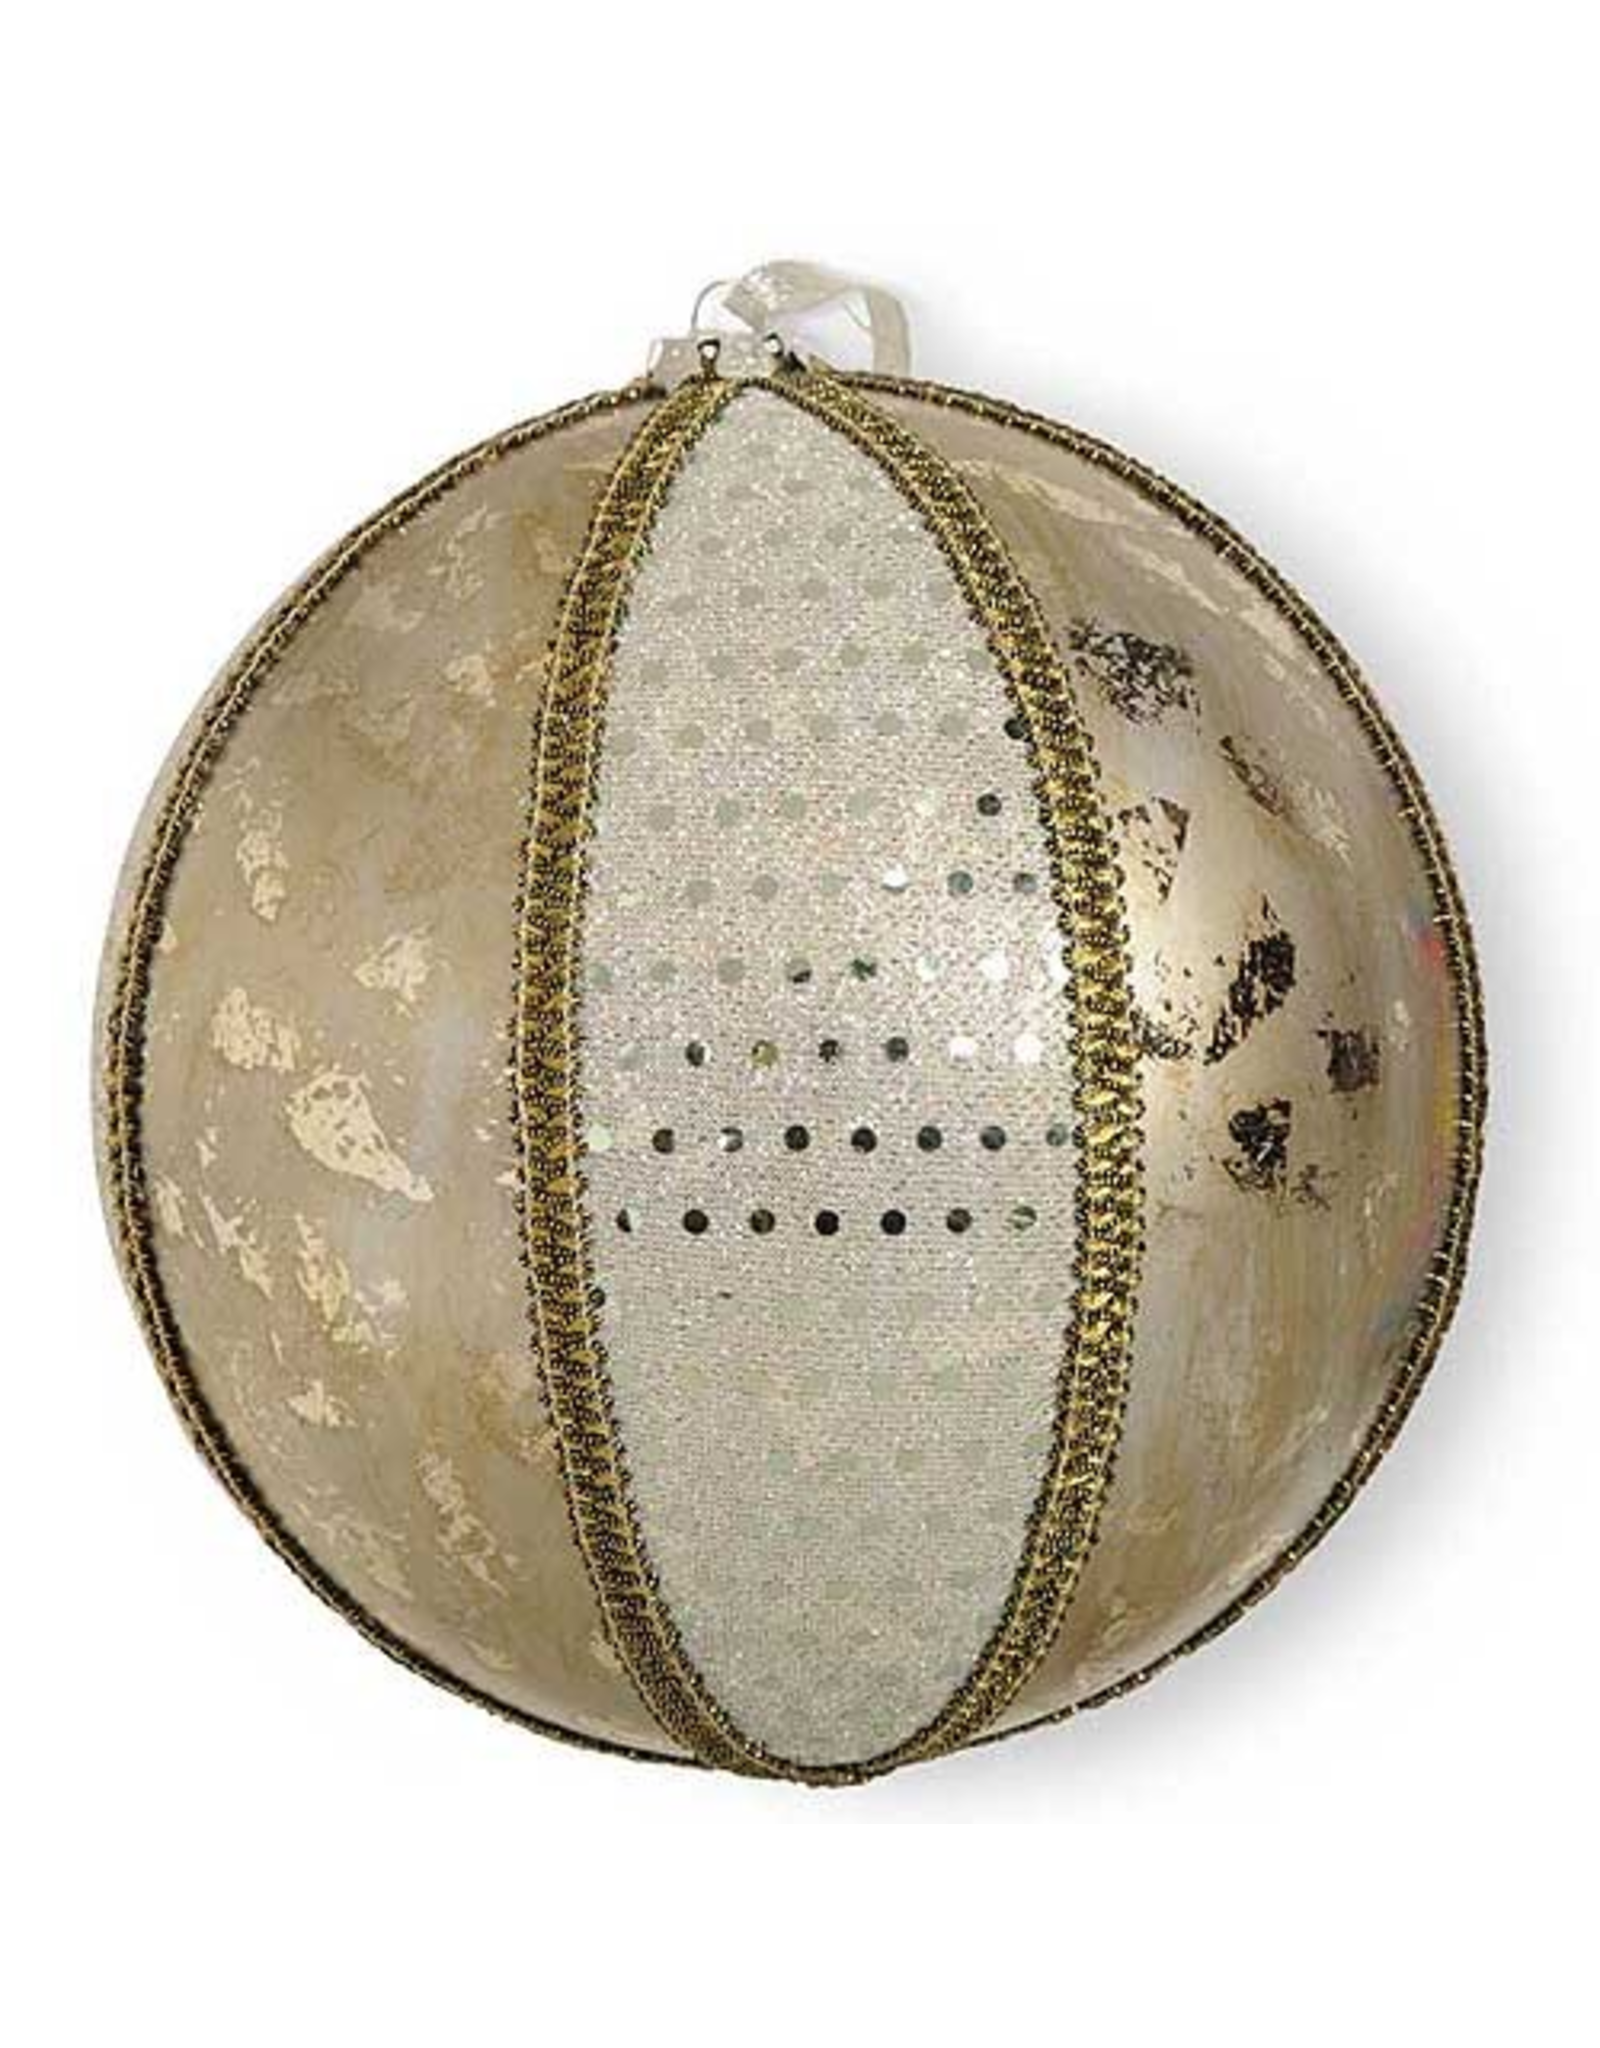 K&K Interiors Christmas Ornament Large Round Silver Gold Ornament 8D